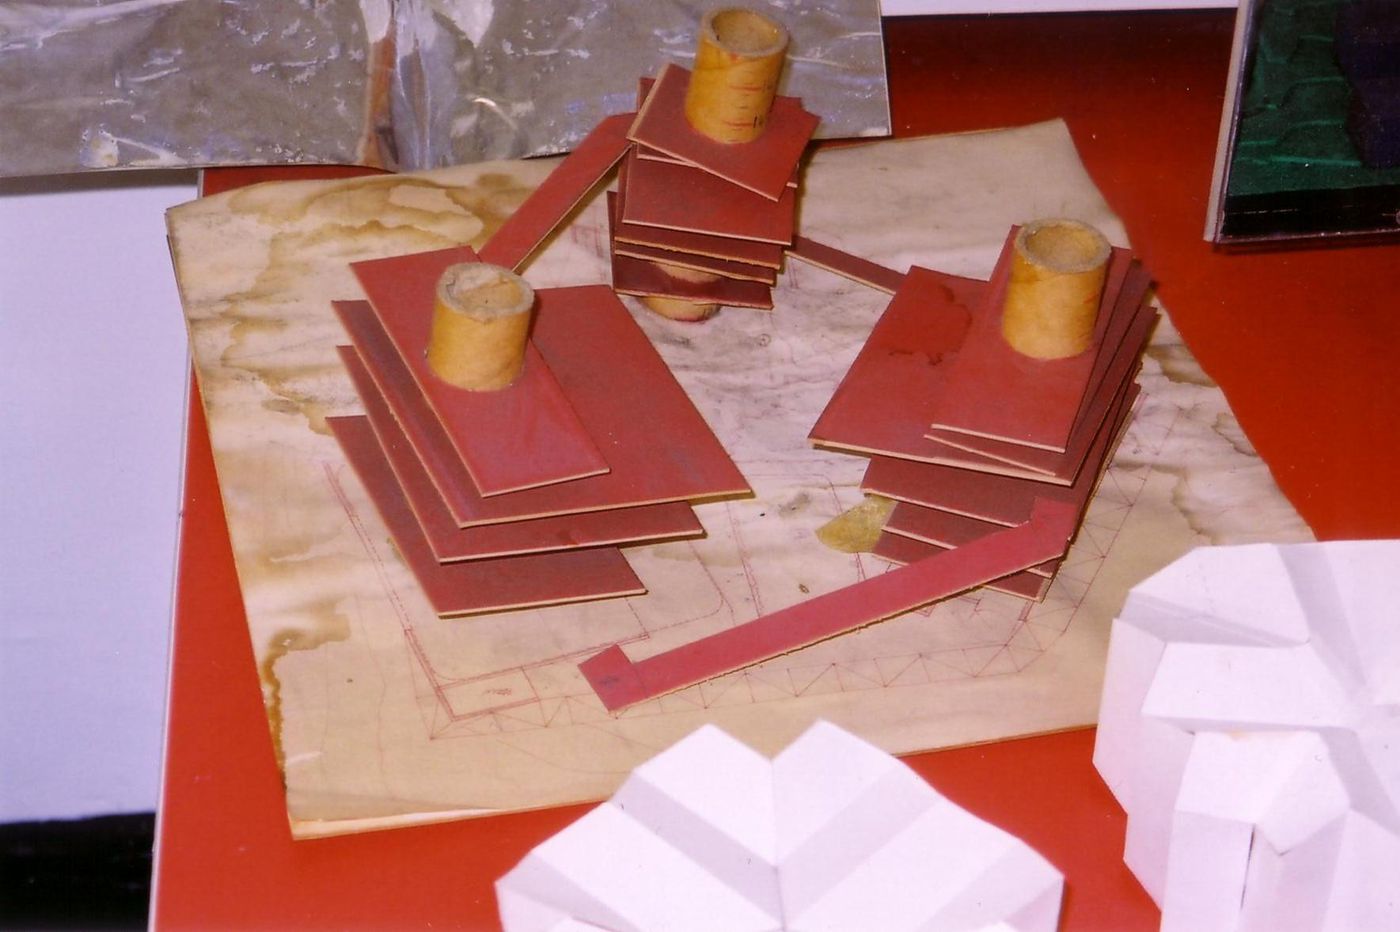 Model, possibly used as a working model, including folded paper structures